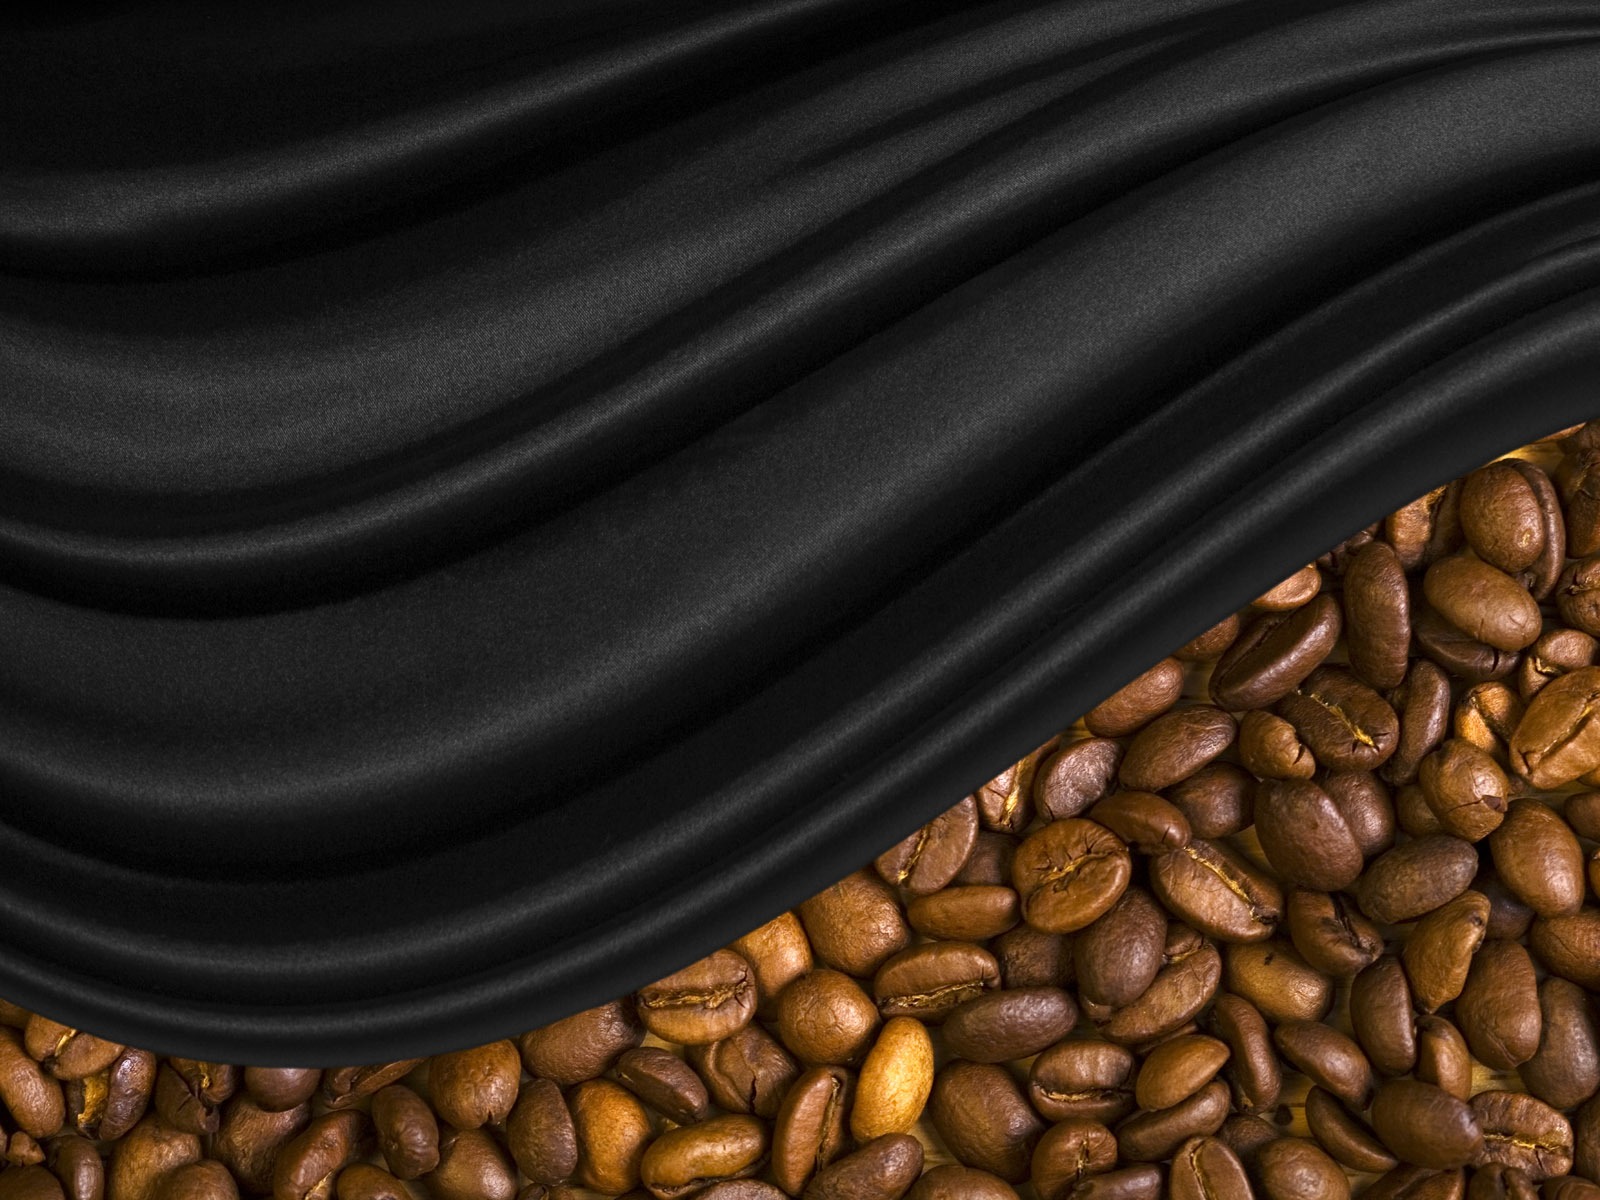 Coffee feature wallpaper (5) #17 - 1600x1200